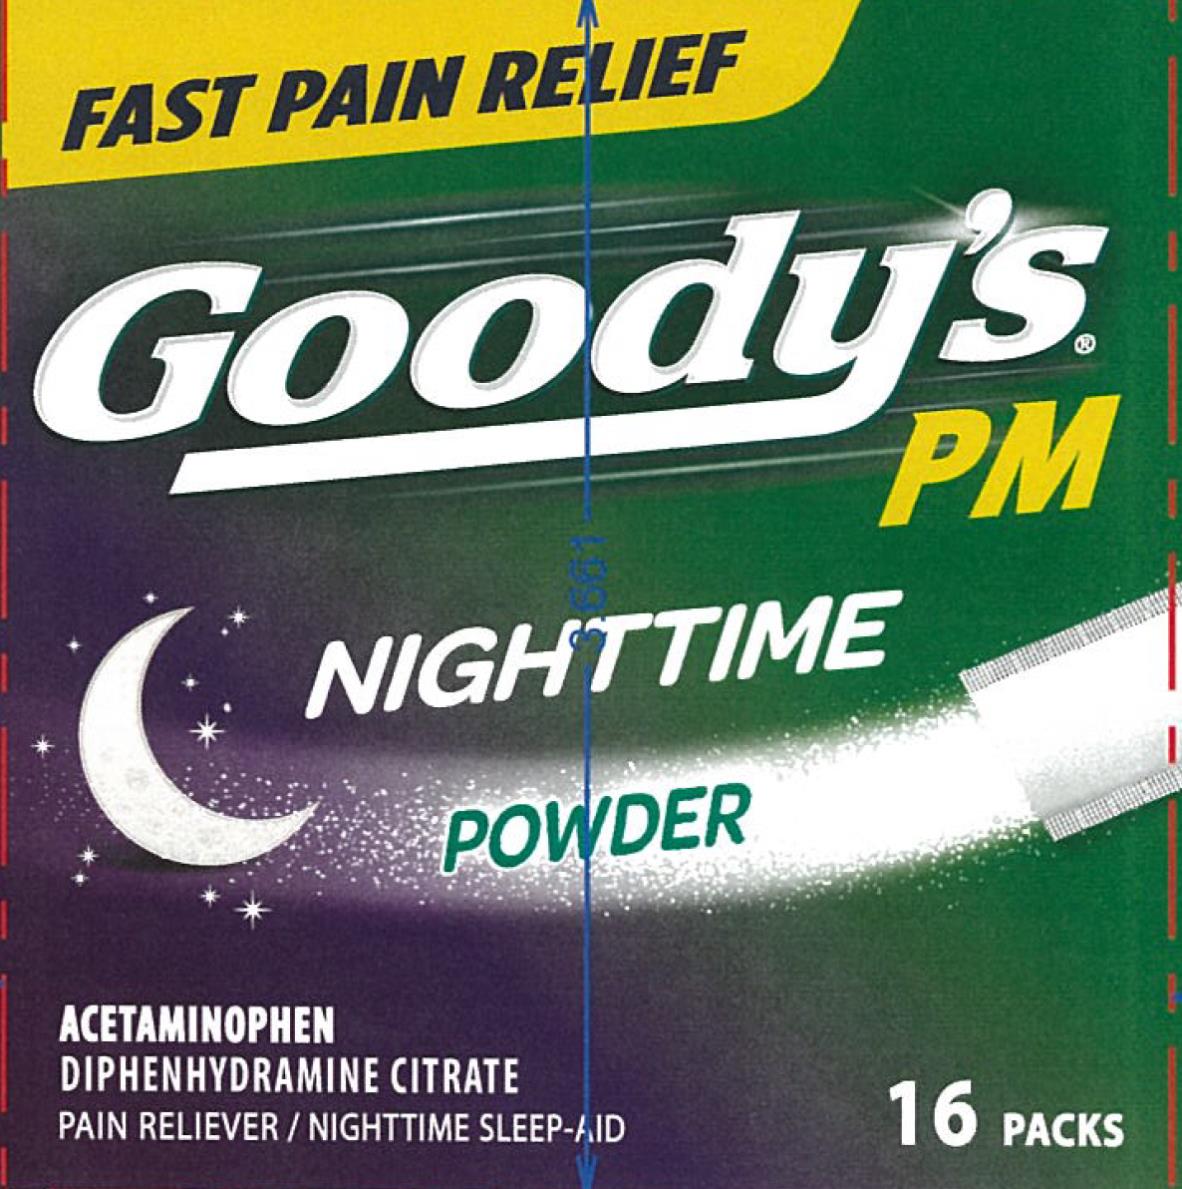 Principal Display Panel
Goody’s PM
Acetaminophen • Diphenhydramine Citrate
Pain Reliever/ Nighttime sleep-aid
FOR PAIN WITH SLEEPLESSNESS
16 Powder Packs
